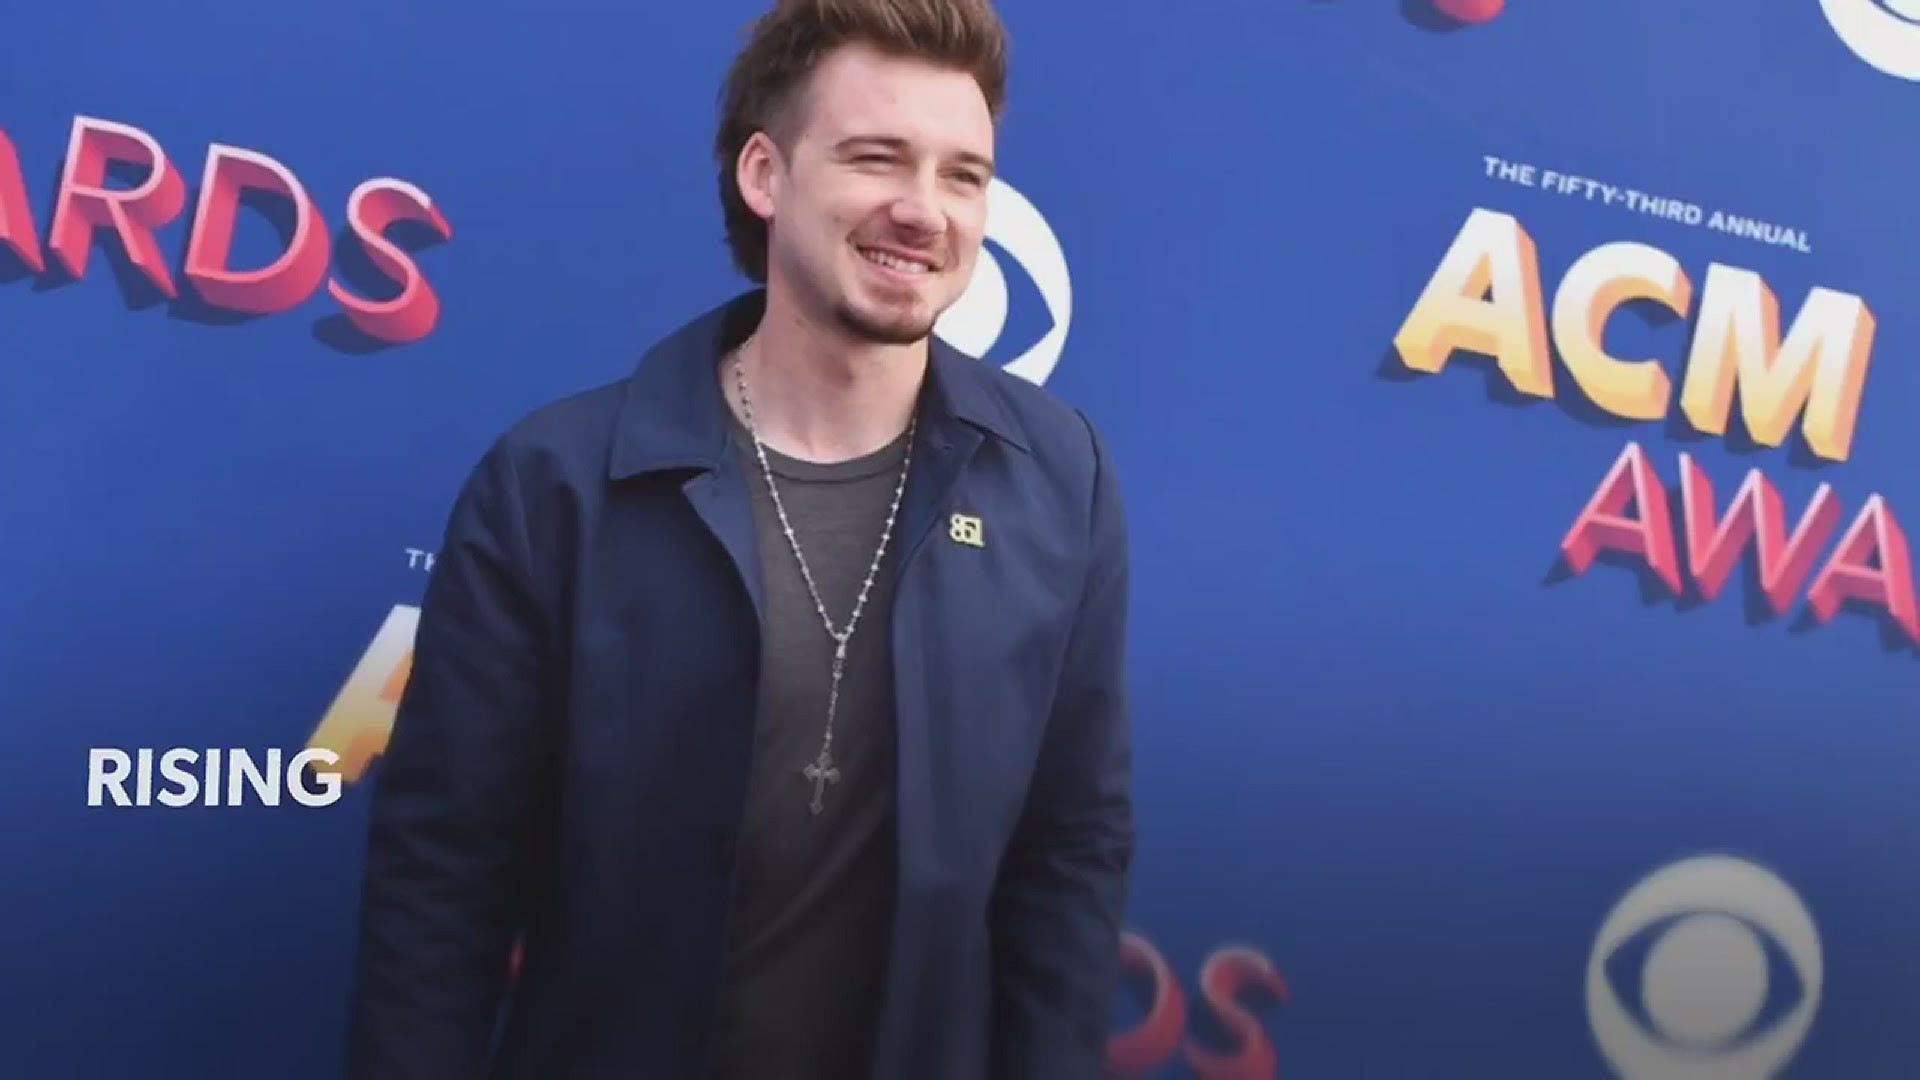 The response from the music industry has been swift after a video showed Morgan Wallen shouting a racial slur outside a home in Nashville, Tennessee.
Credit: WXIA